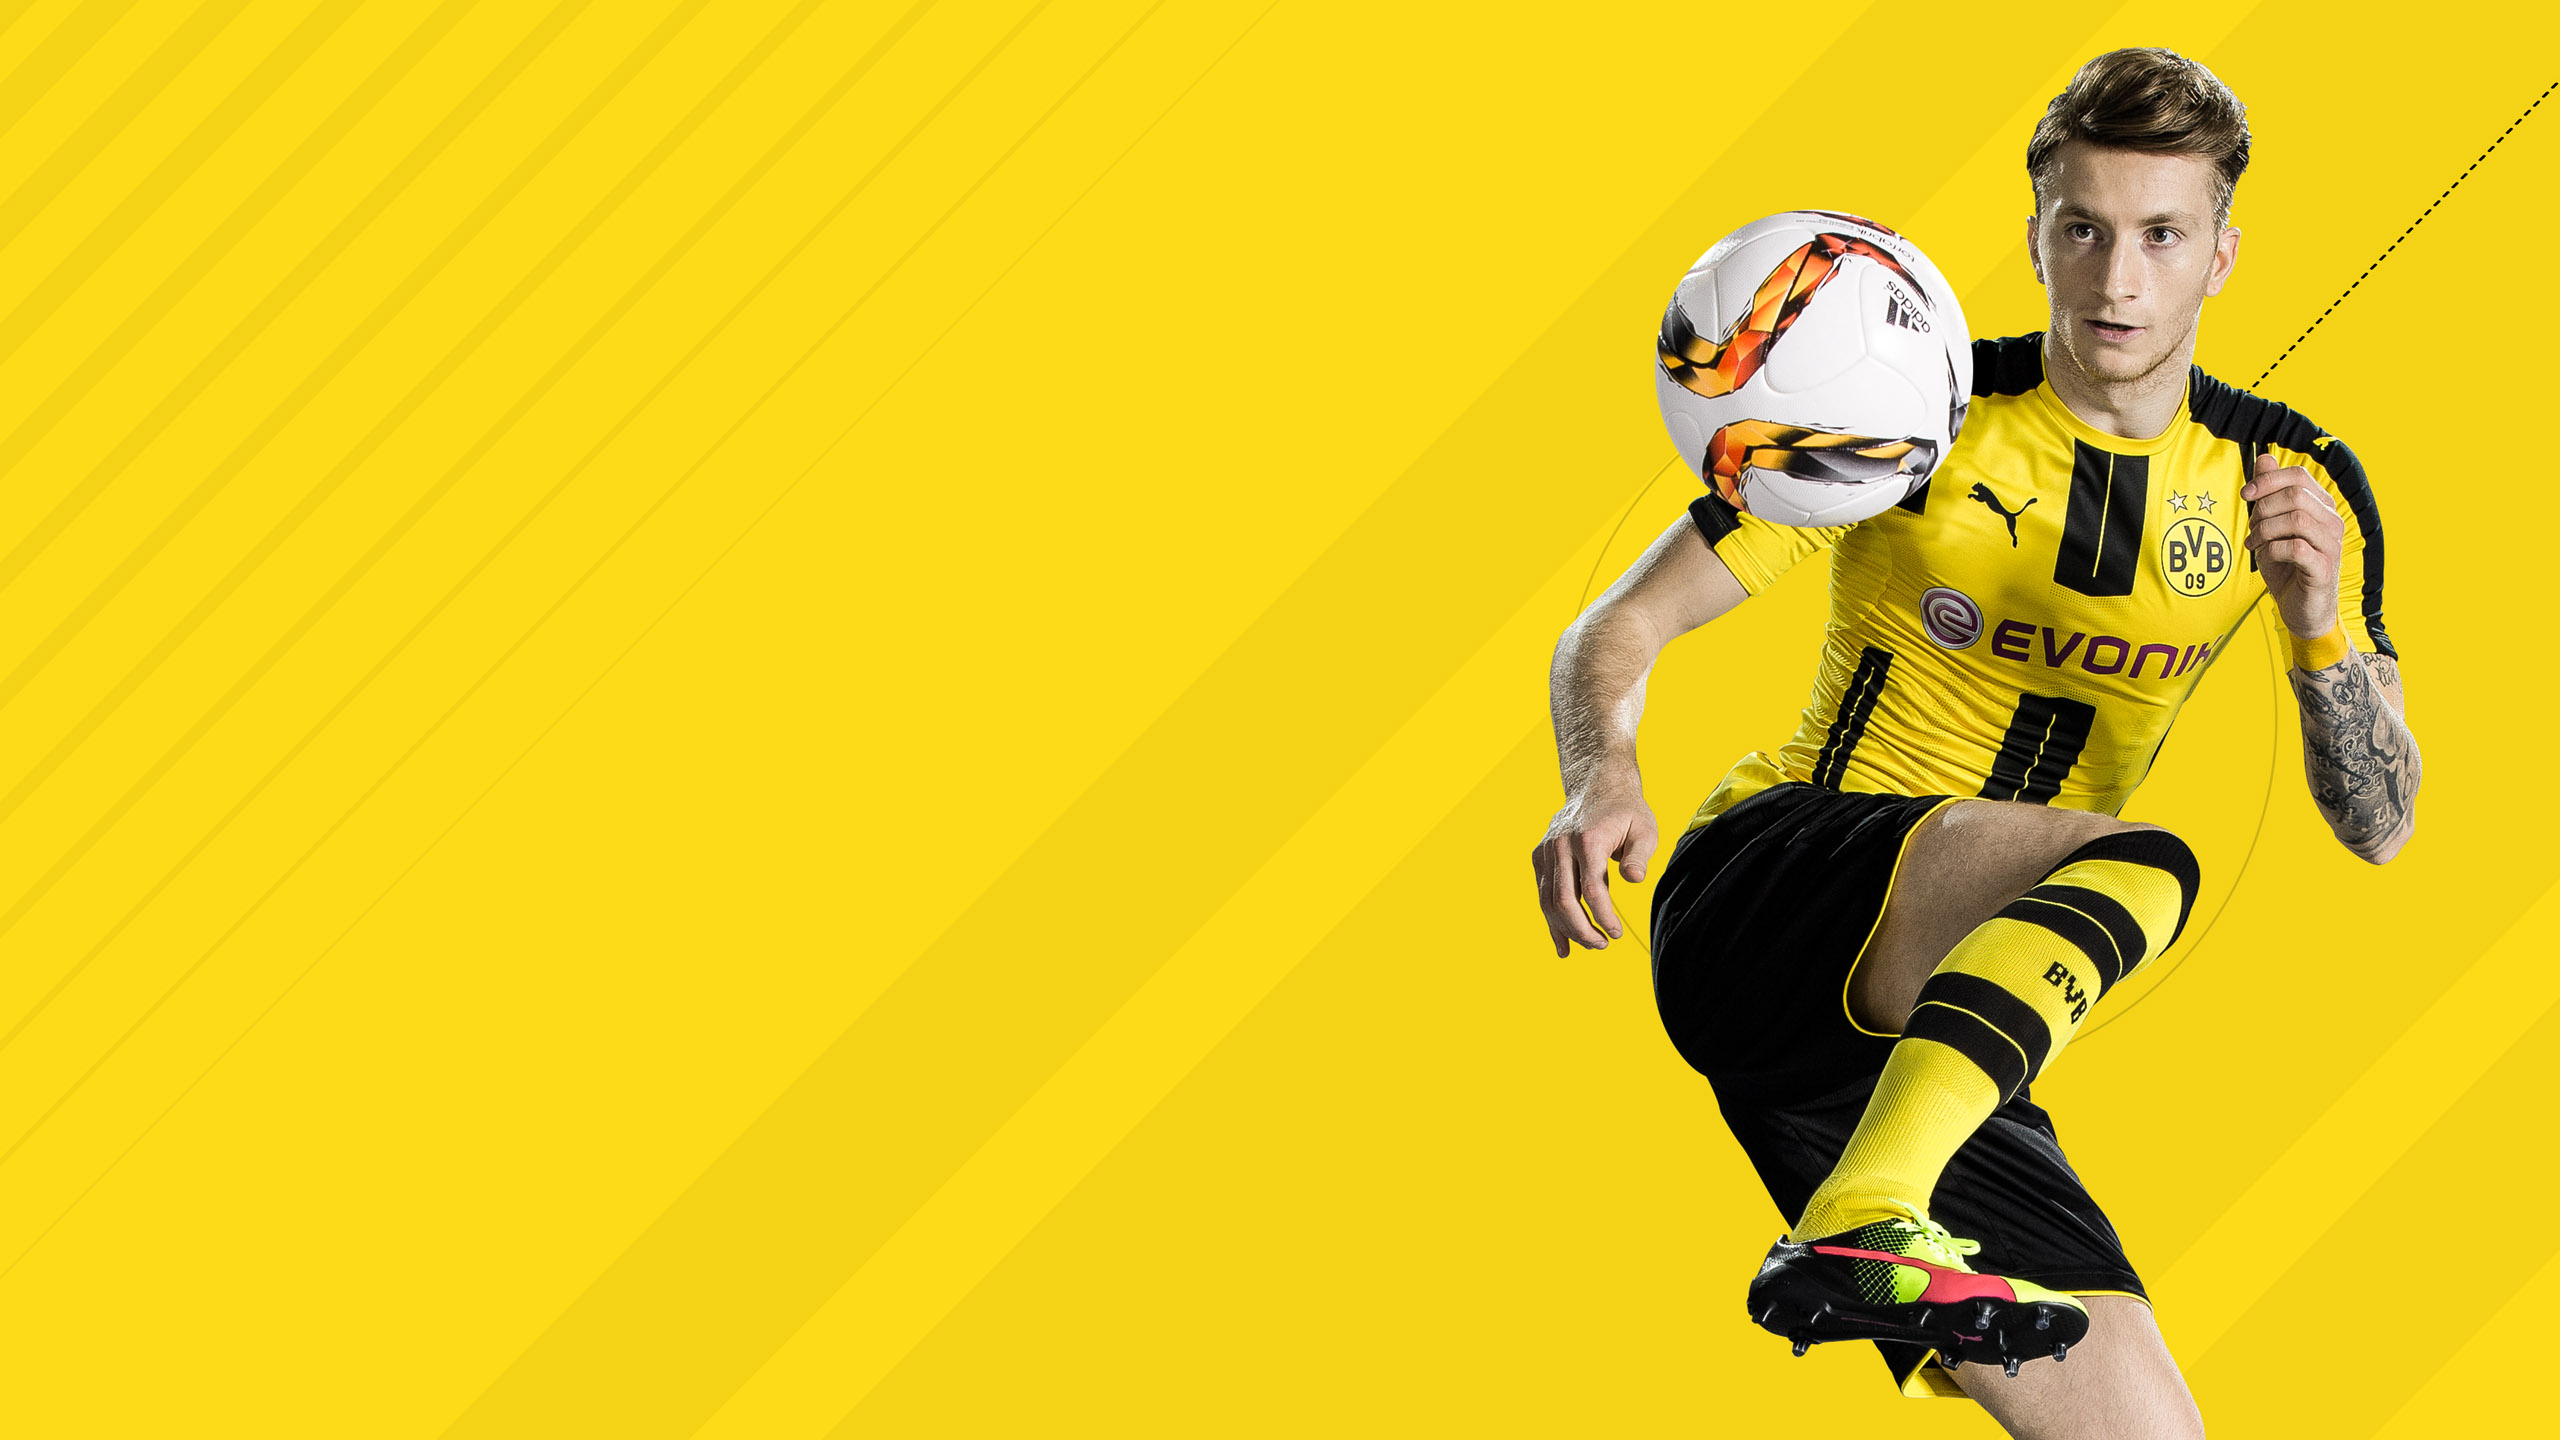 Fifa17 Wallpaper Pictures